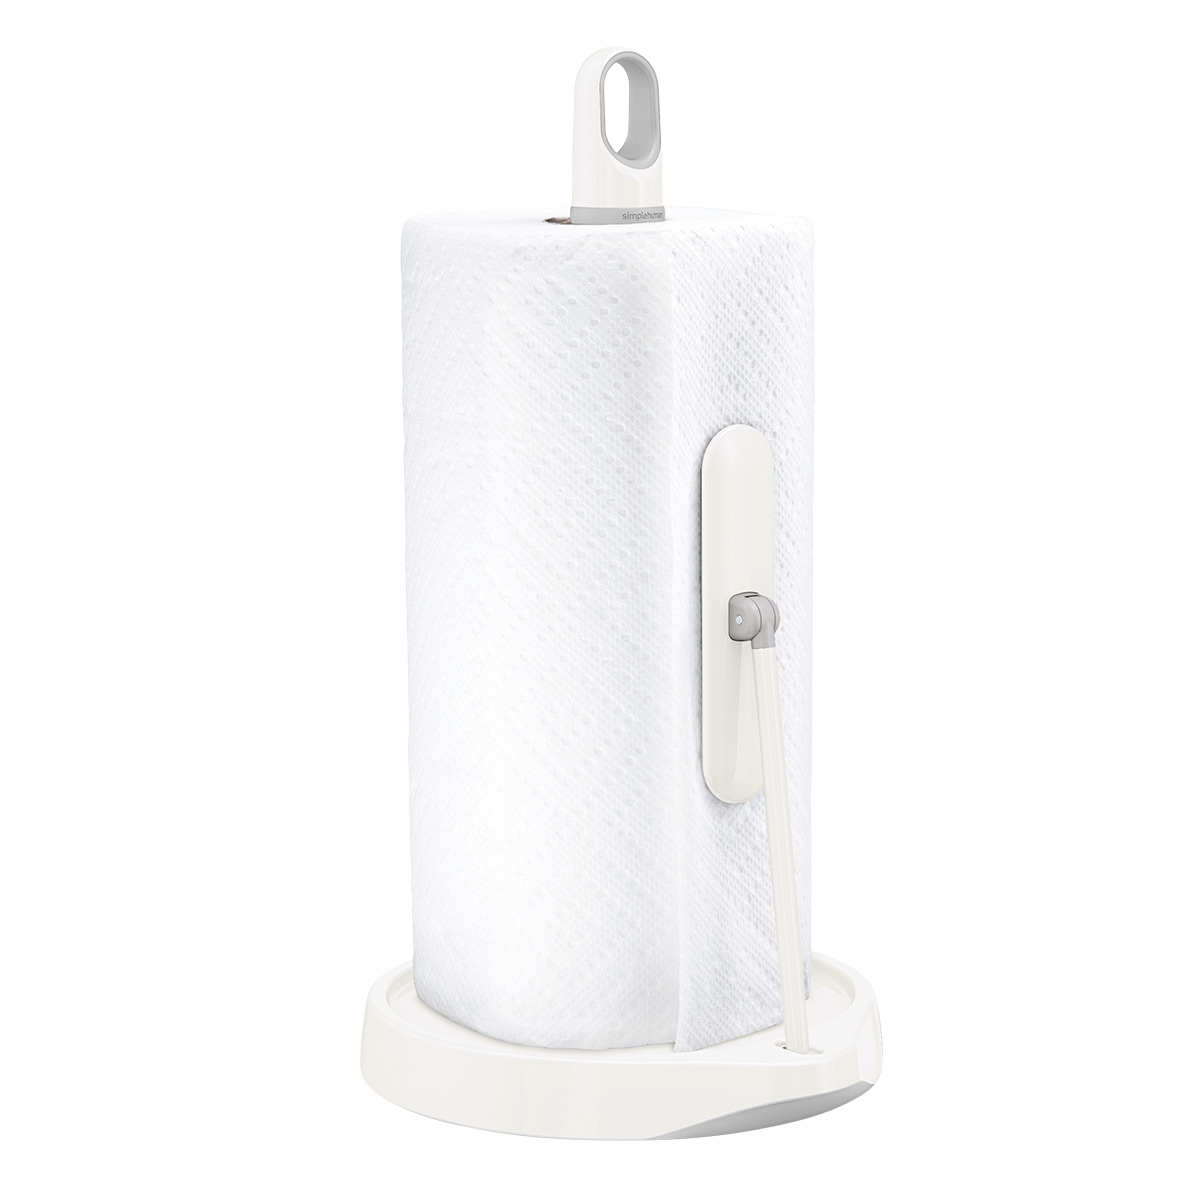 https://www.containerstore.com/catalogimages/476601/10091931-sh-tension-arm-paper-towel-.jpg